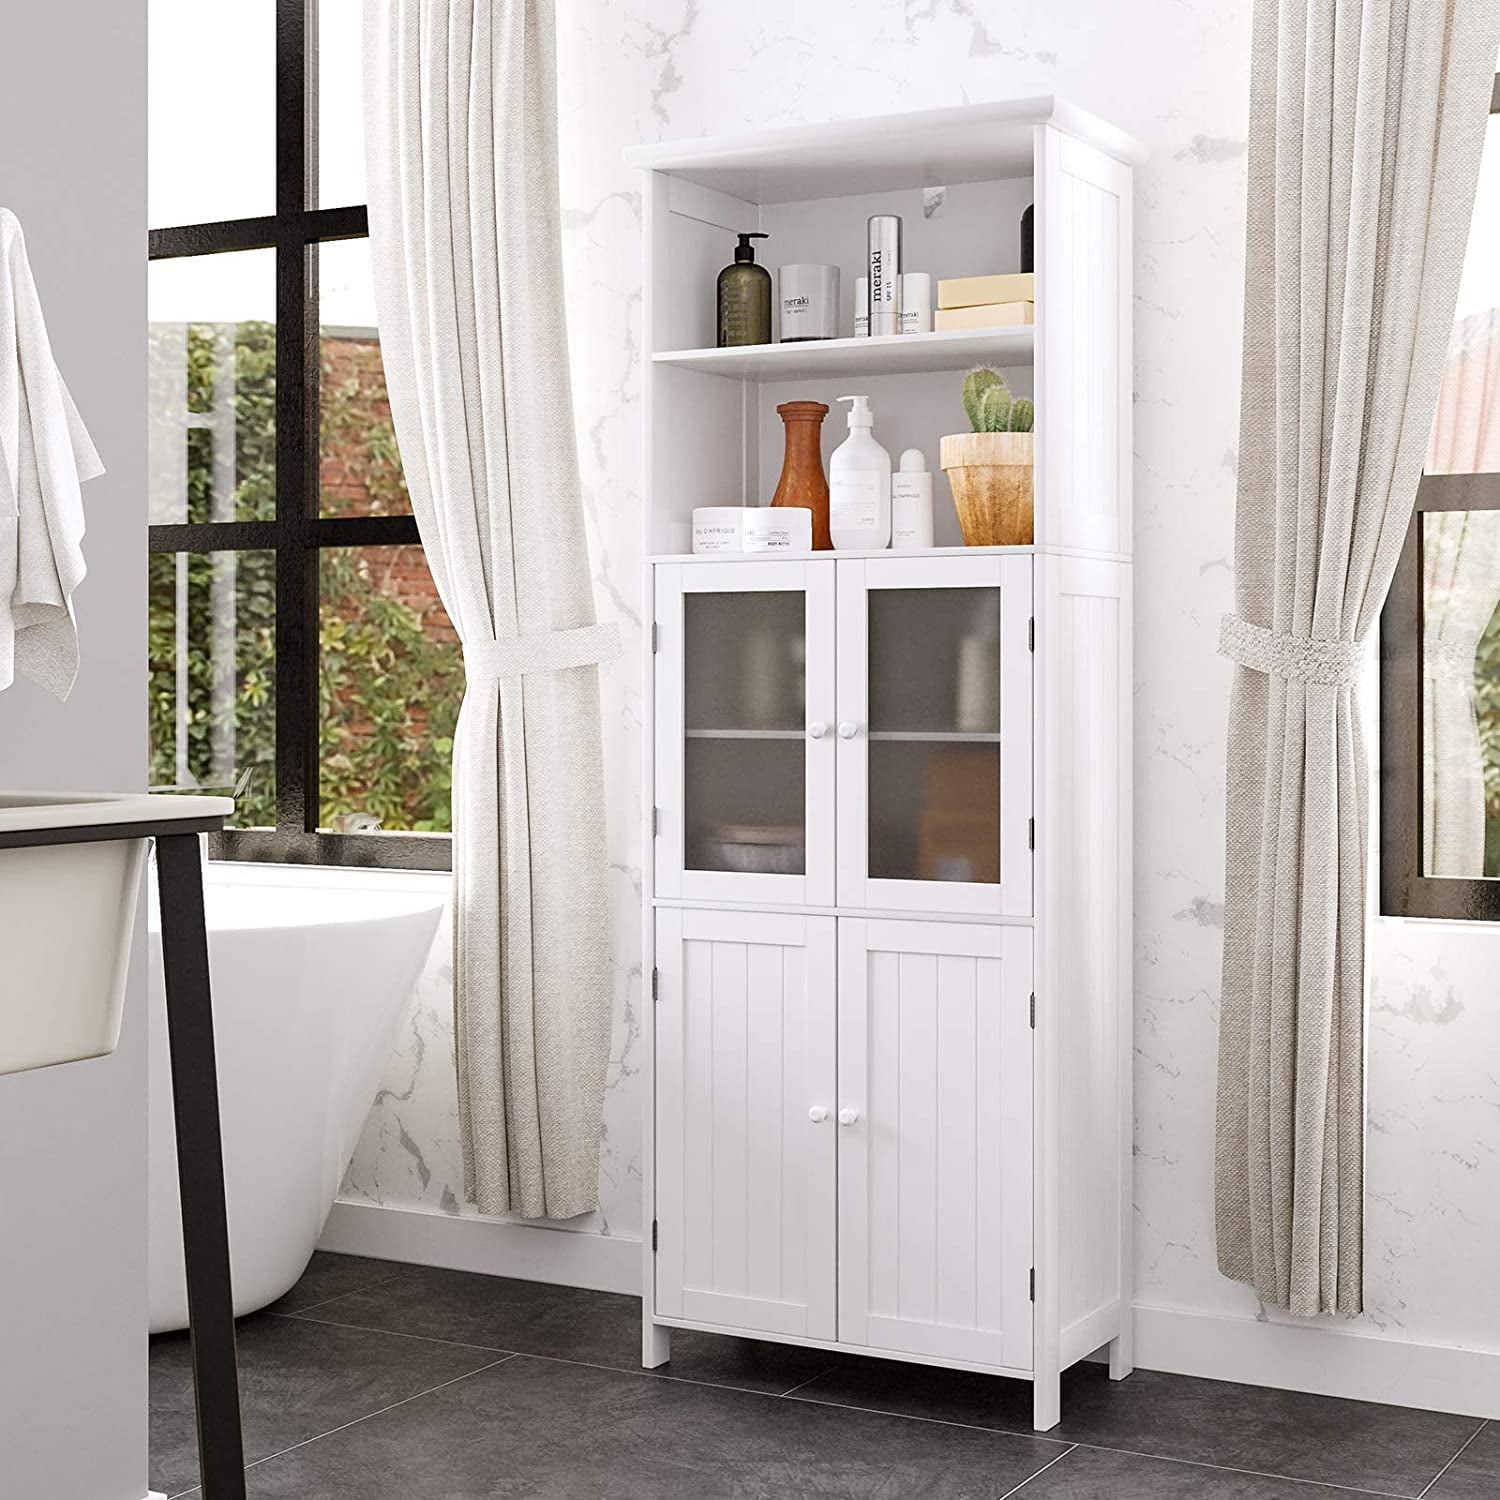 Linen Tower Bath Cabinet, Free Standing Storage Cabinets With Doors